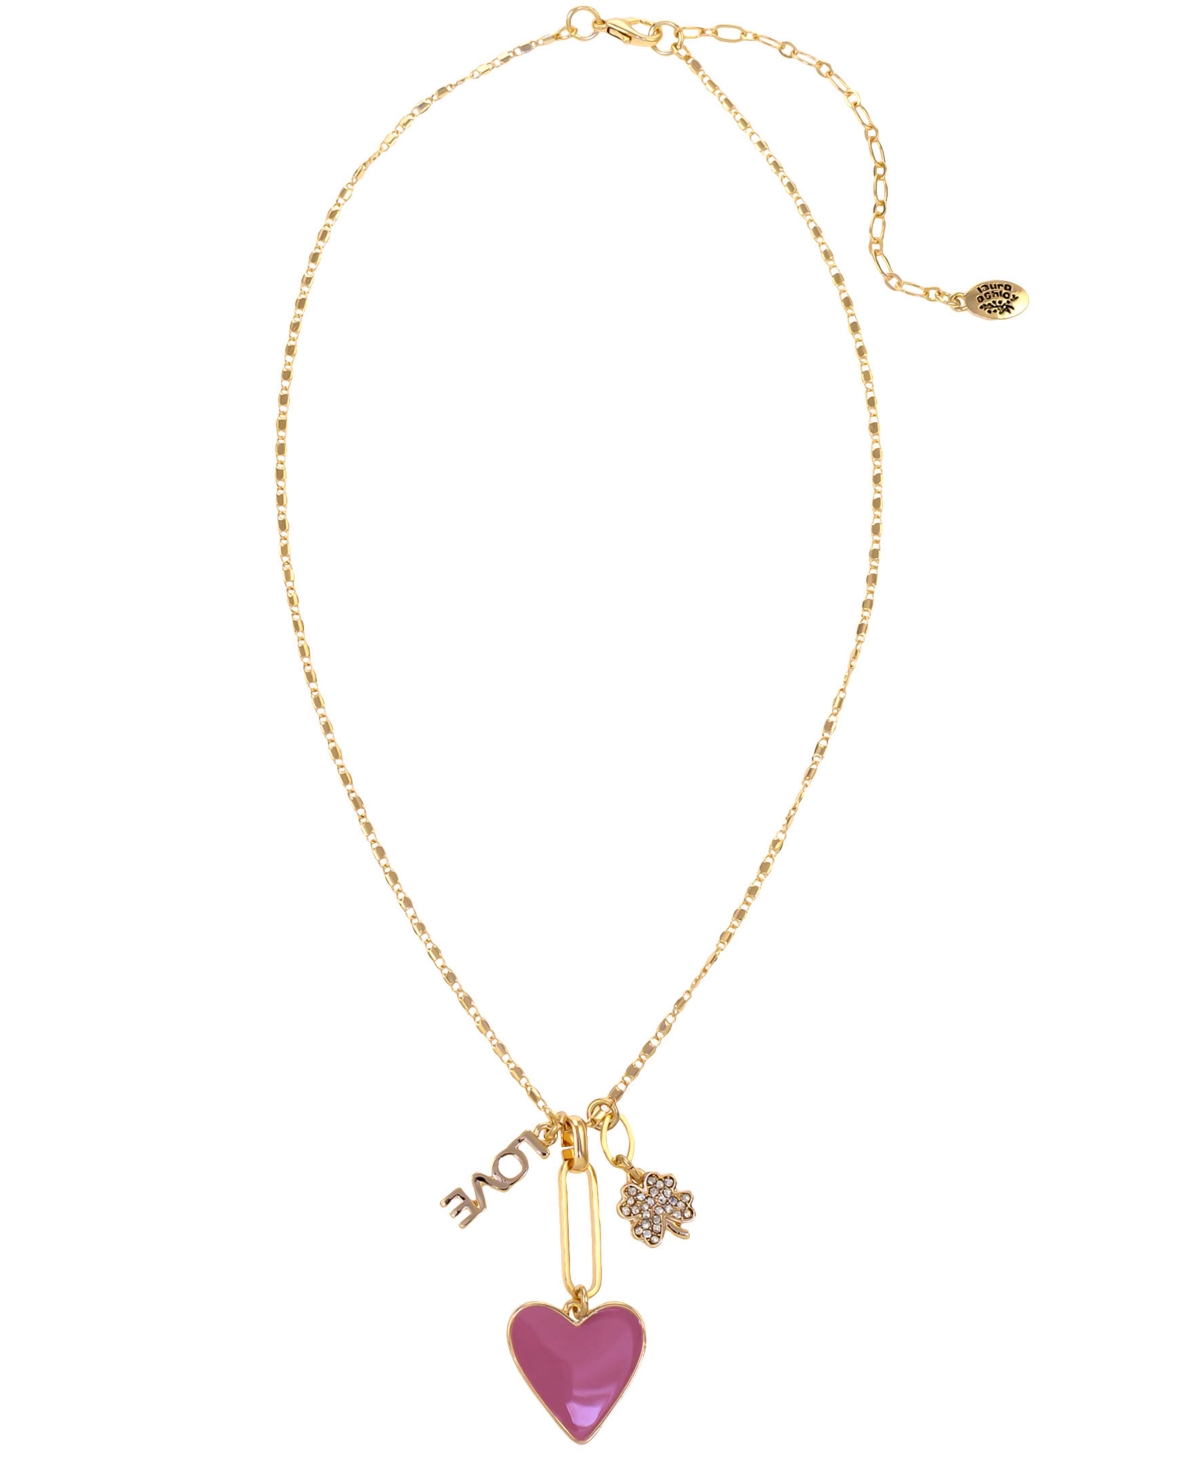 Laura Ashley Love Charm Necklace In Pink